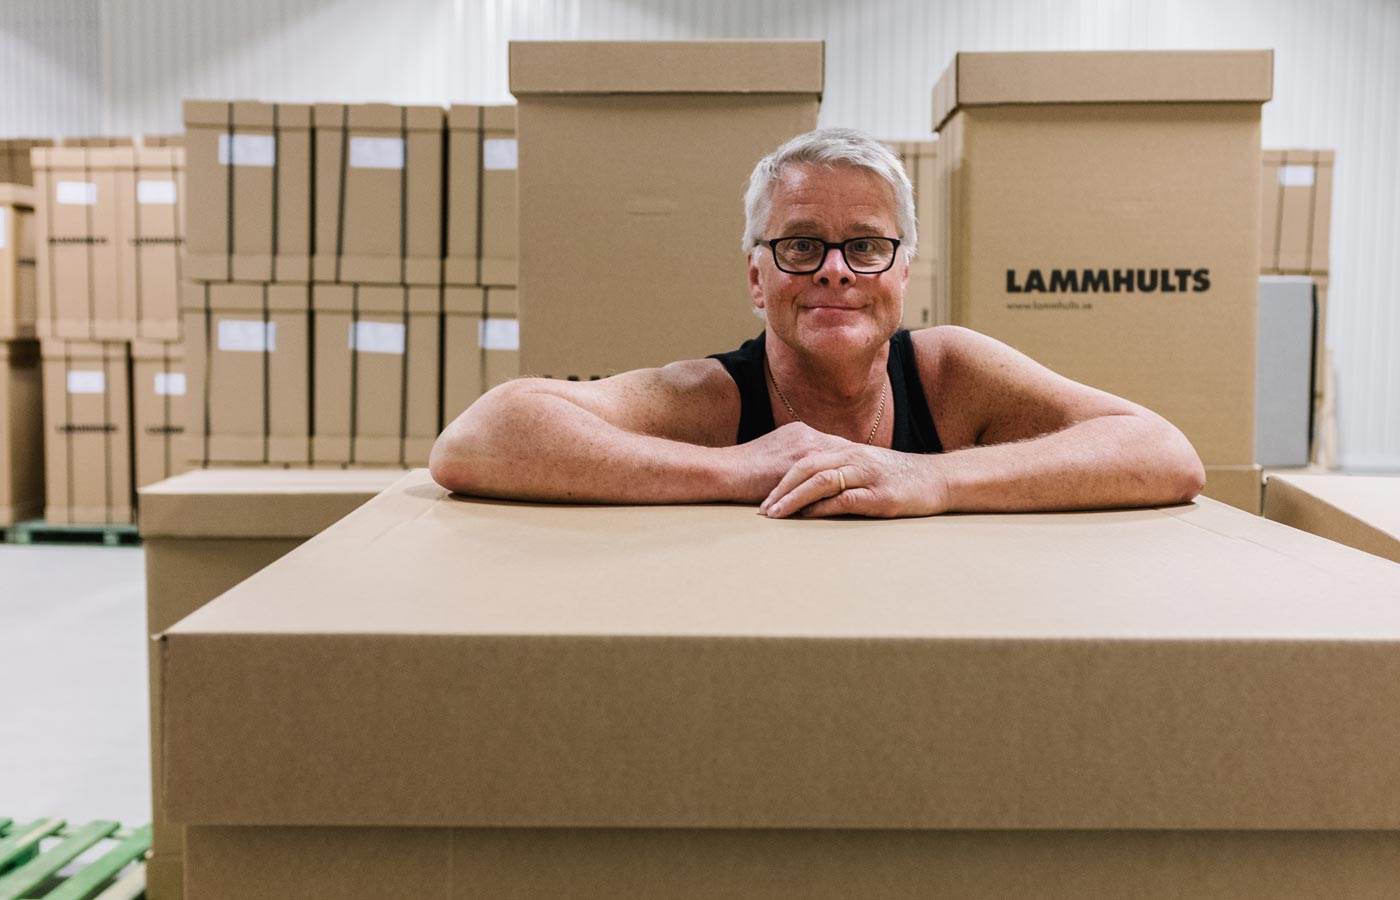 Packaging and labelling at Lammhults